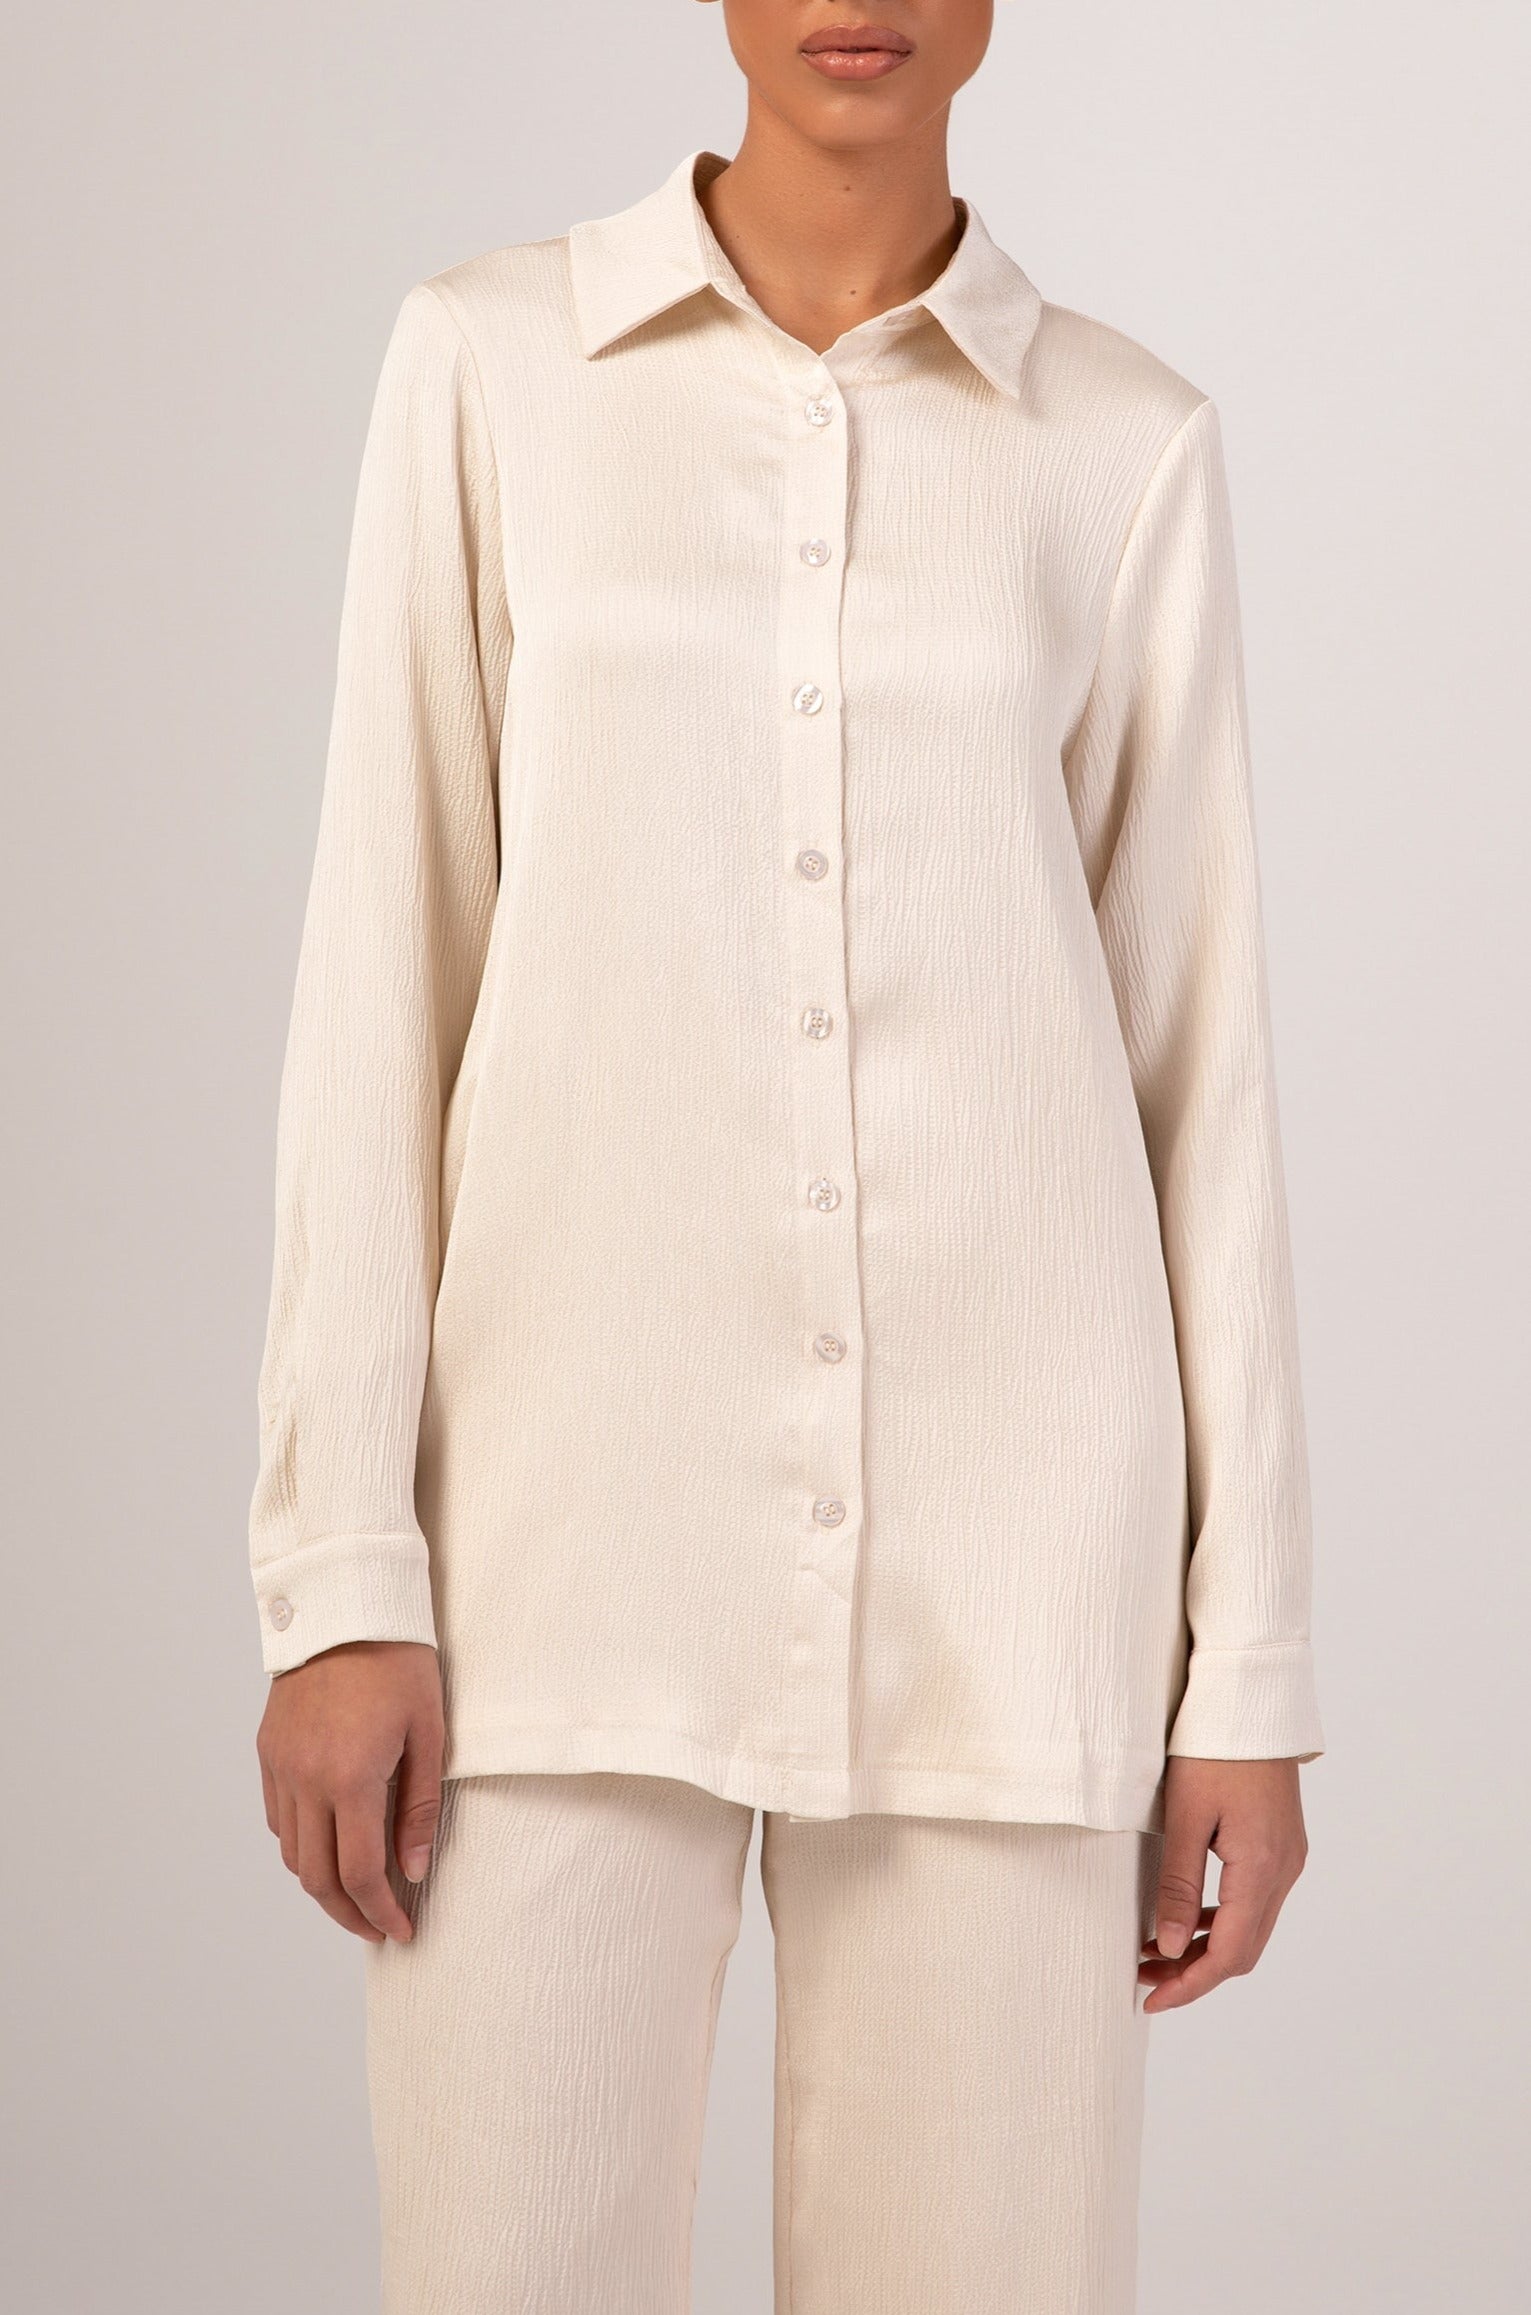 Katia Textured Button Down Top - Ivory epschoolboard 